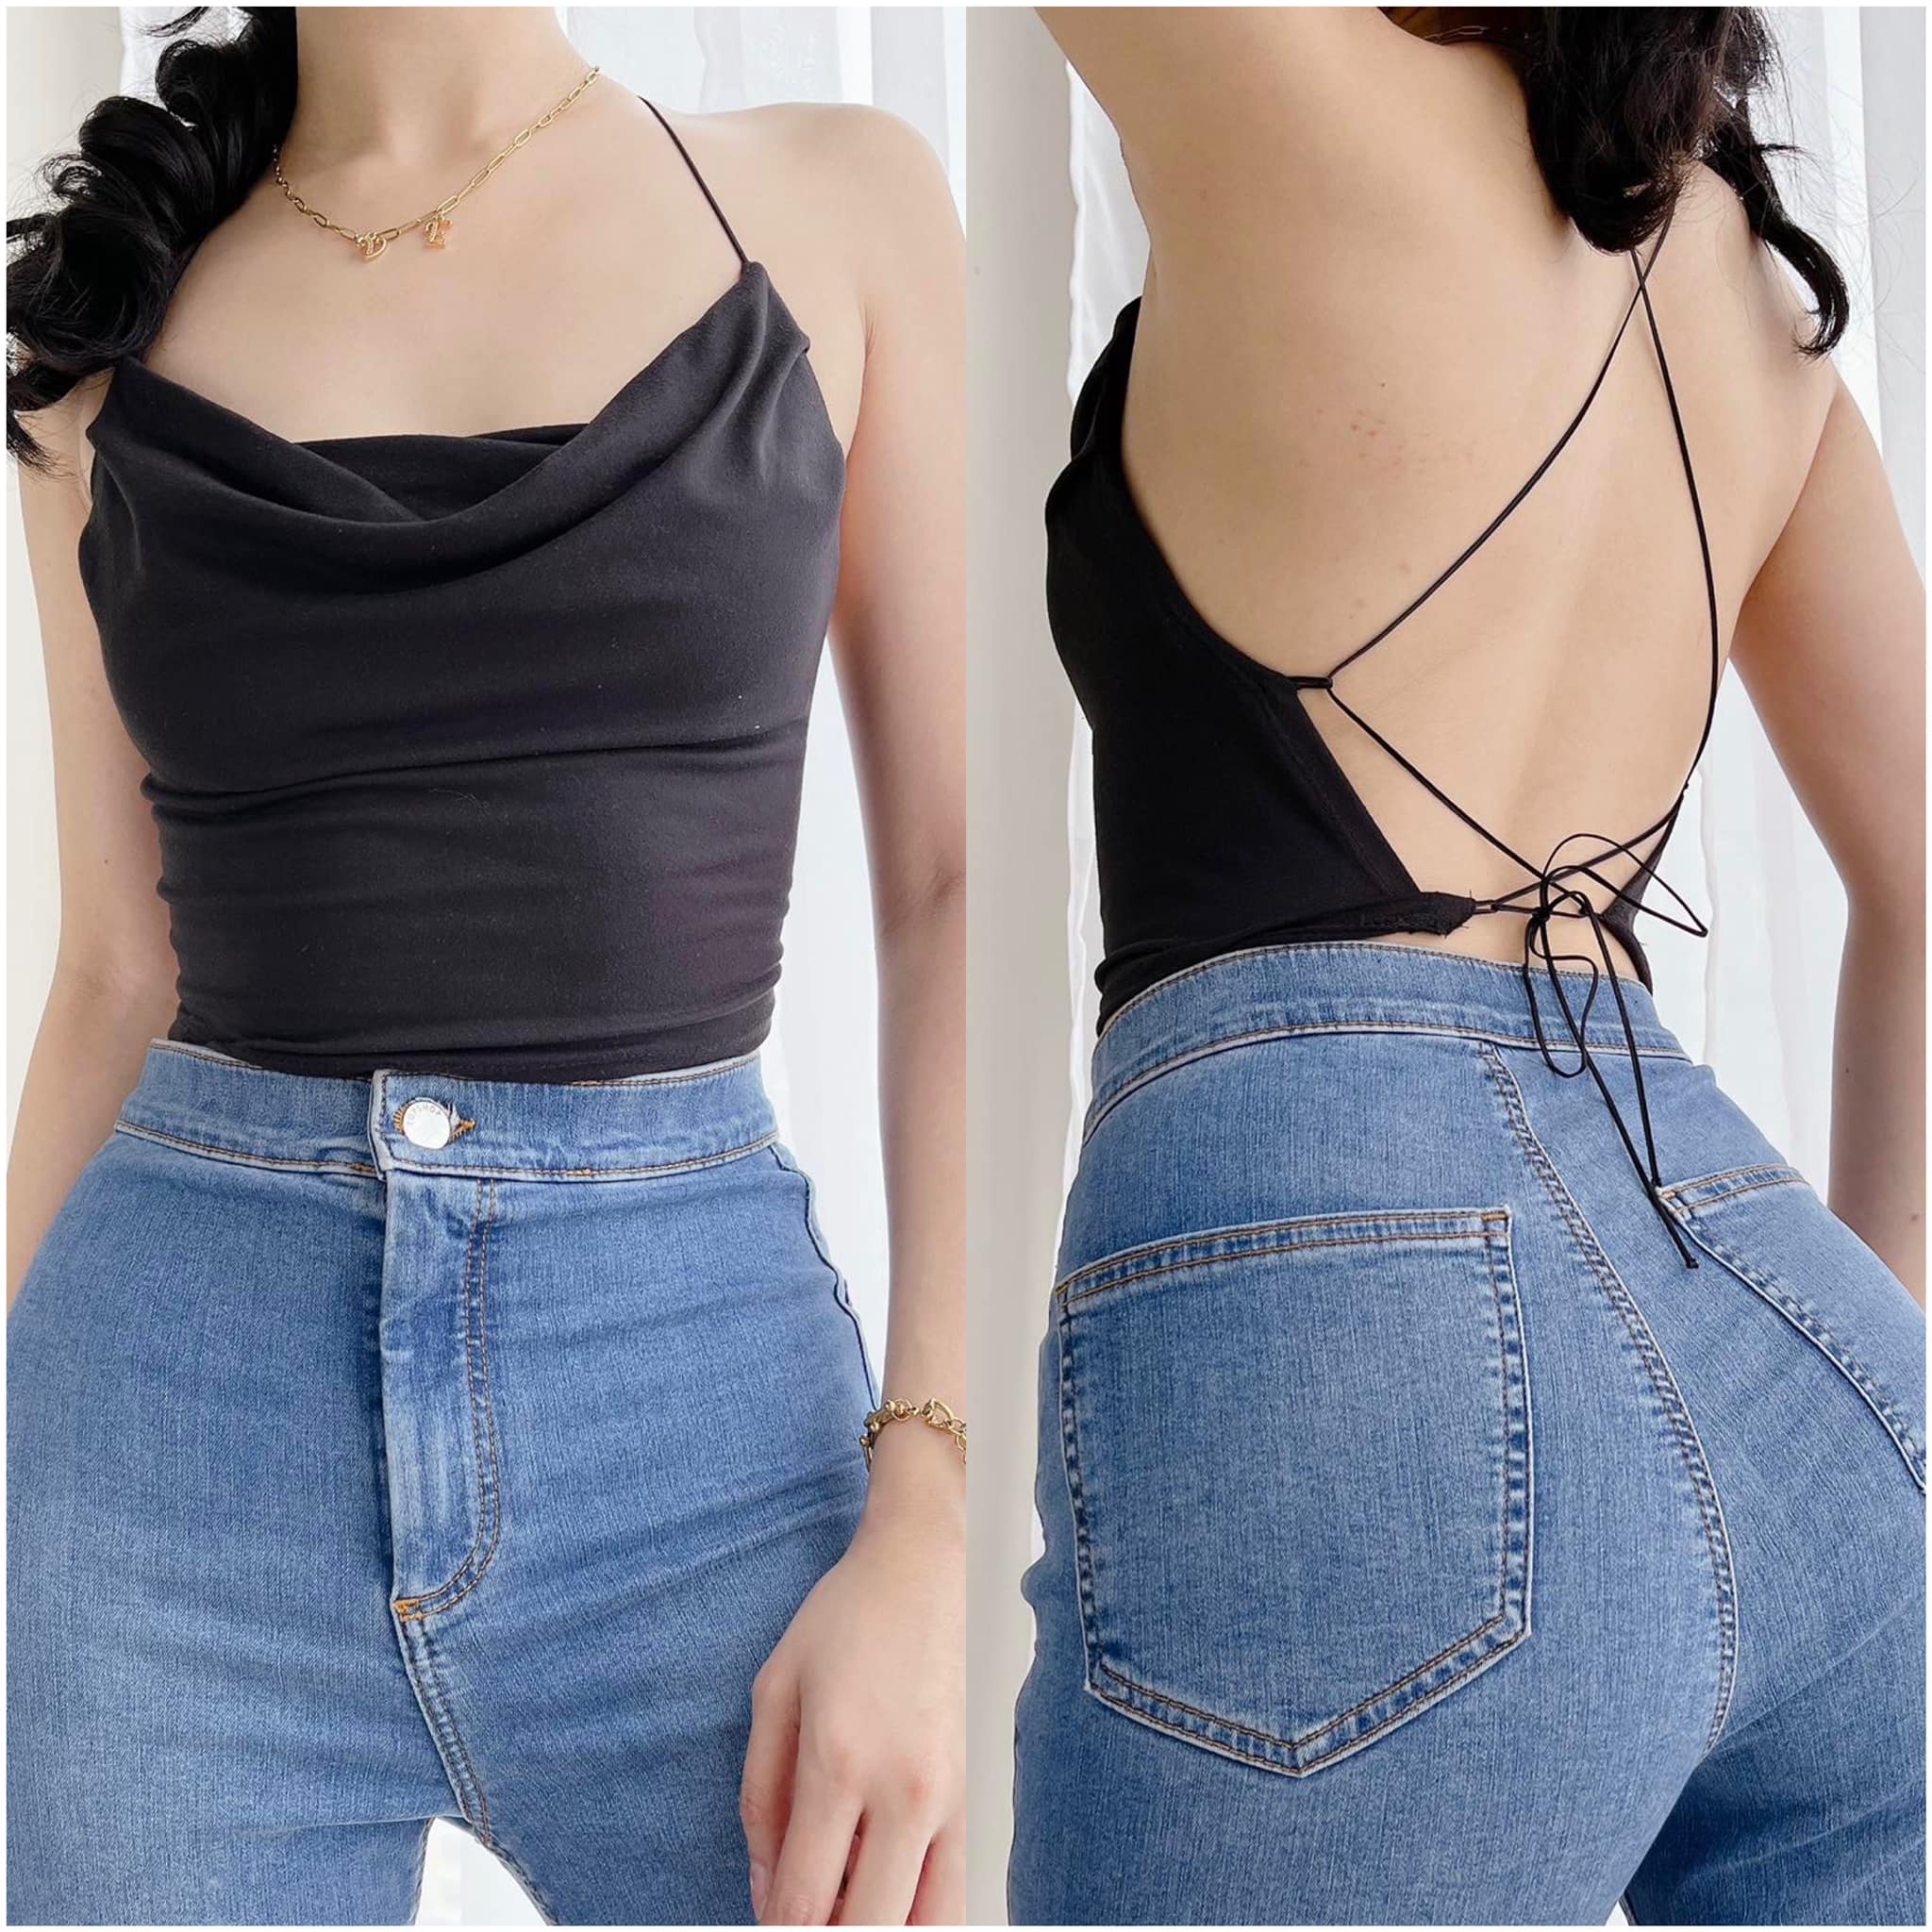 The viral  backless top!! You need it for the summer🌞 have